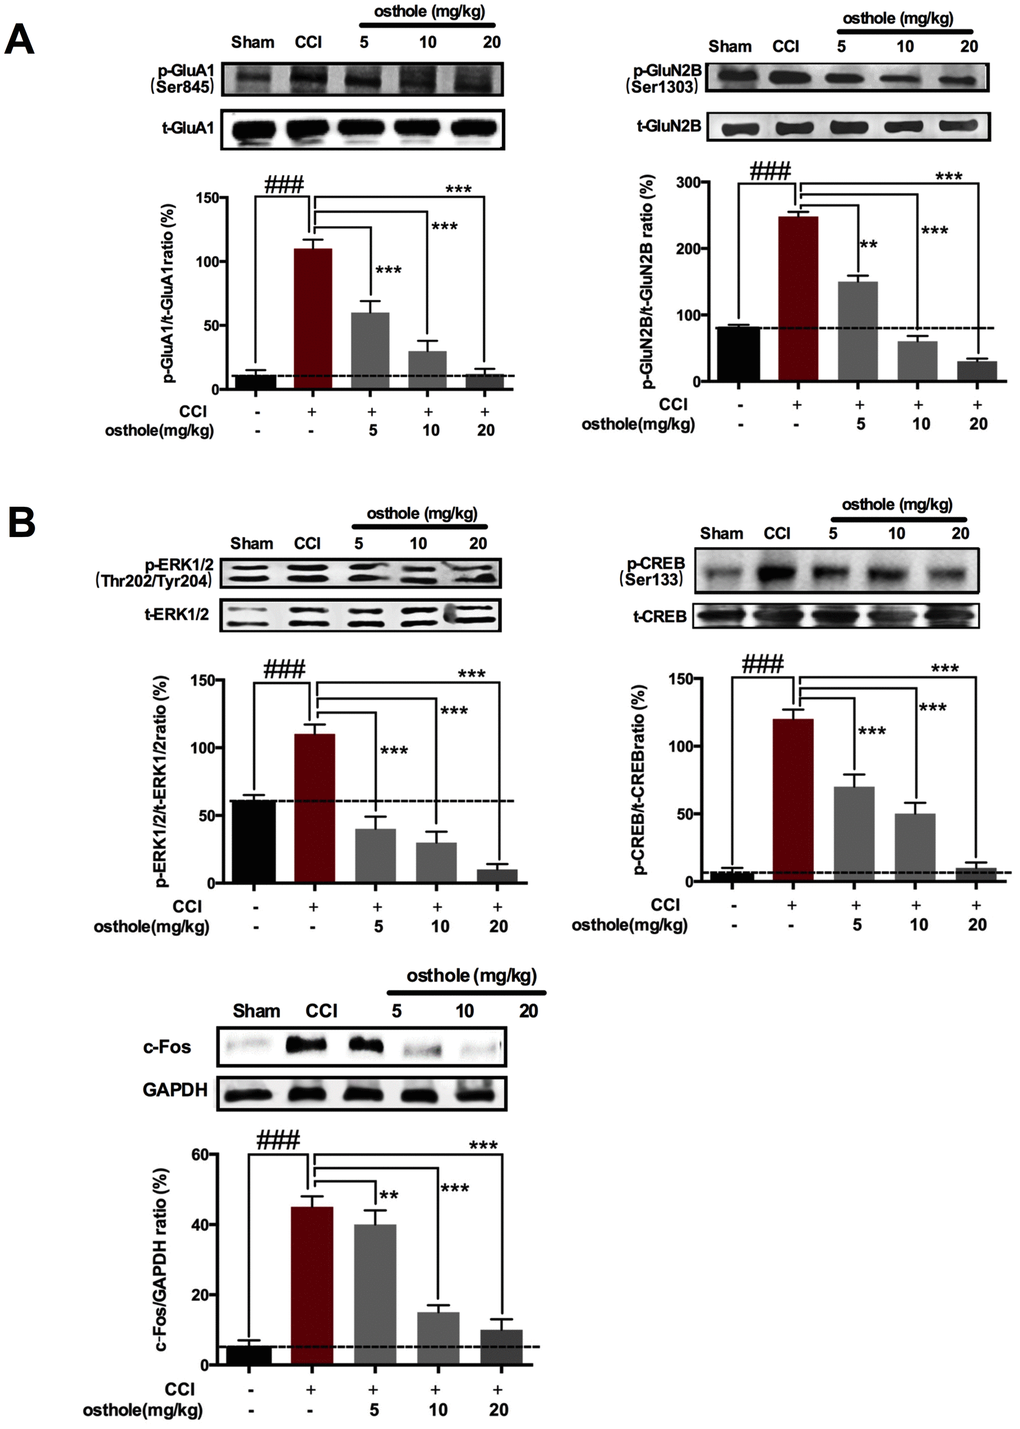 The effect of osthole on Postsynaptic receptor pain-related signal molecules in neurons of CCI mice. (A) pGluA1 (ser845) and pGluN2B (S1303) were decreased after osthole treatment compared to CCI mice. (B) Osthole dose-dependently inhibited expression of p-ERK, p-CREB and c-Fos protein compared to CCI group. ###ppp